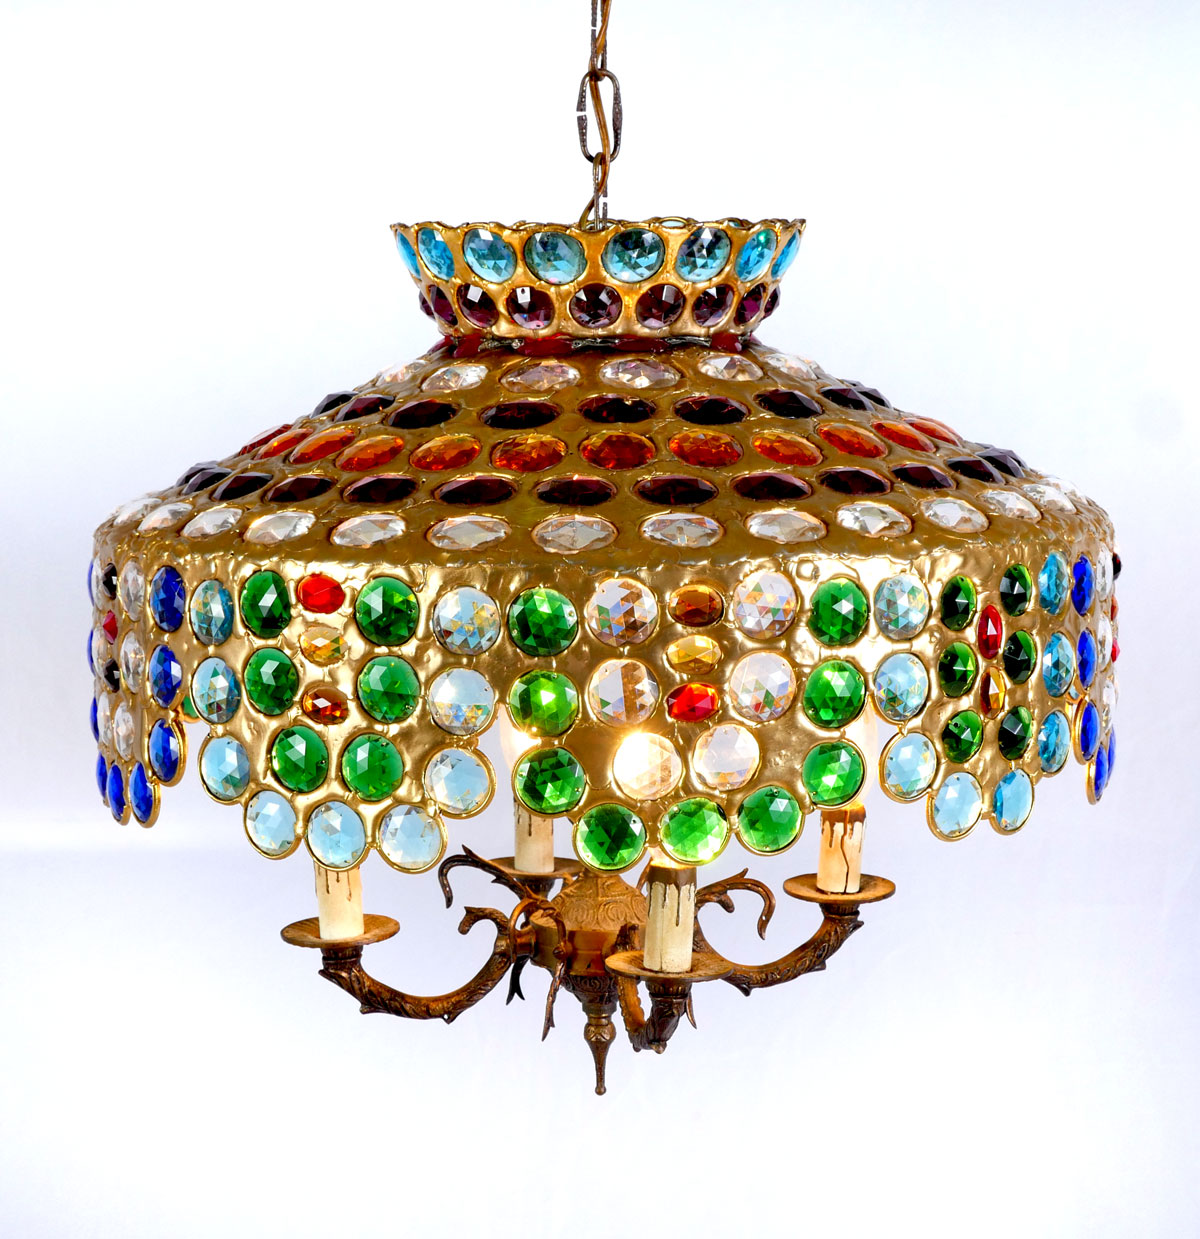 PEWTER & LEAD STAINED GLASS CHANDELIER: